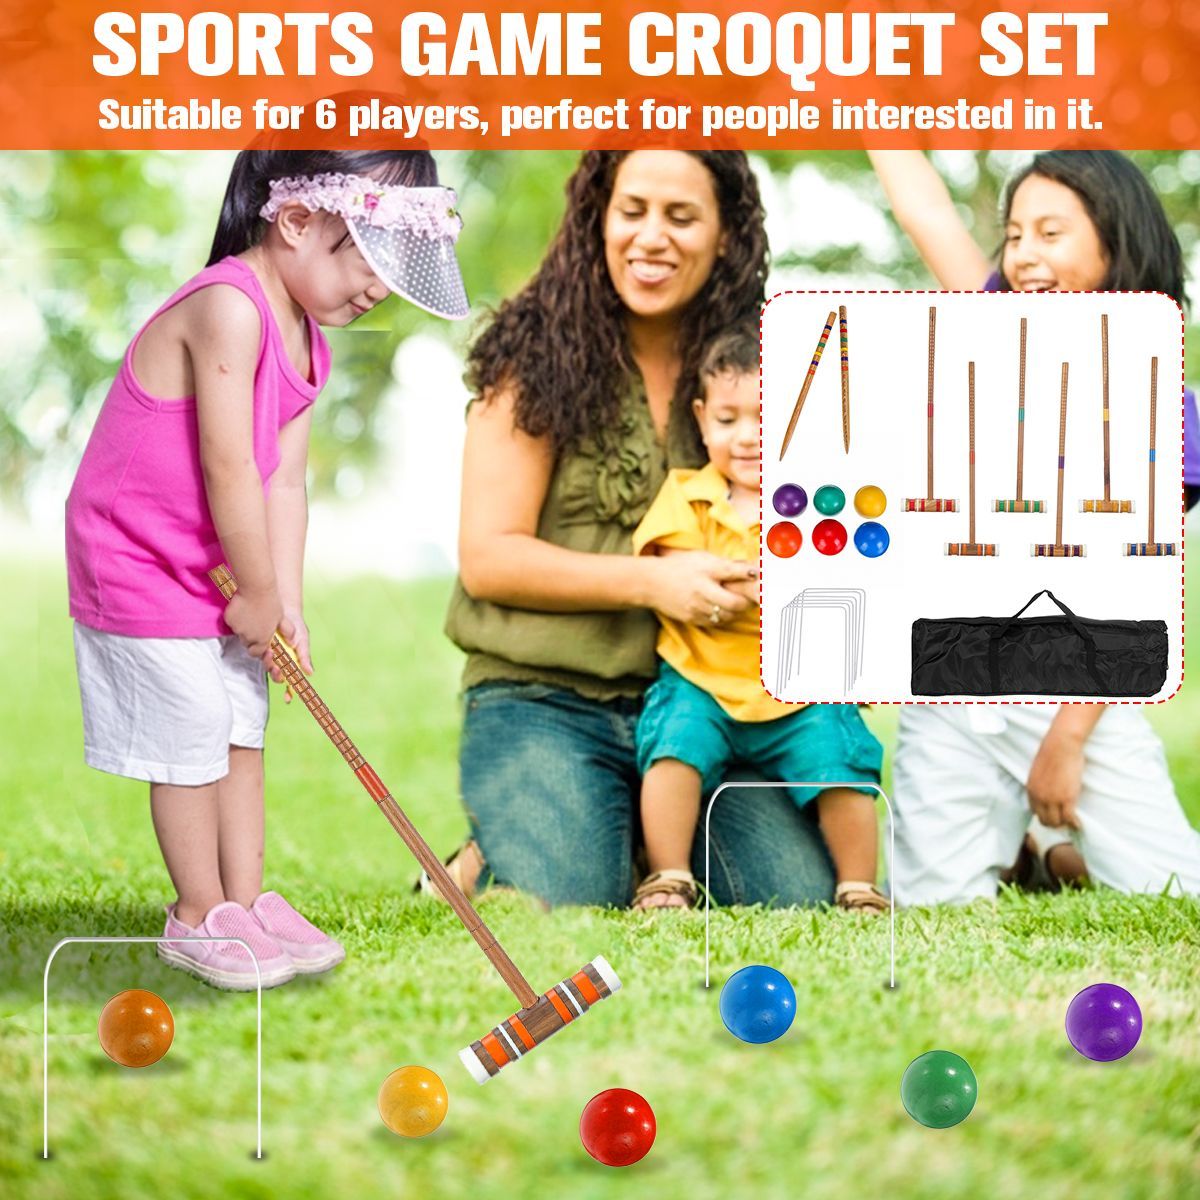 Outdoor-Game-Sport-Gate-Ball-Croguet-Set-for-6-Players-luxury-childrens-Sports-Toy-Croquet-Doorball--1717526